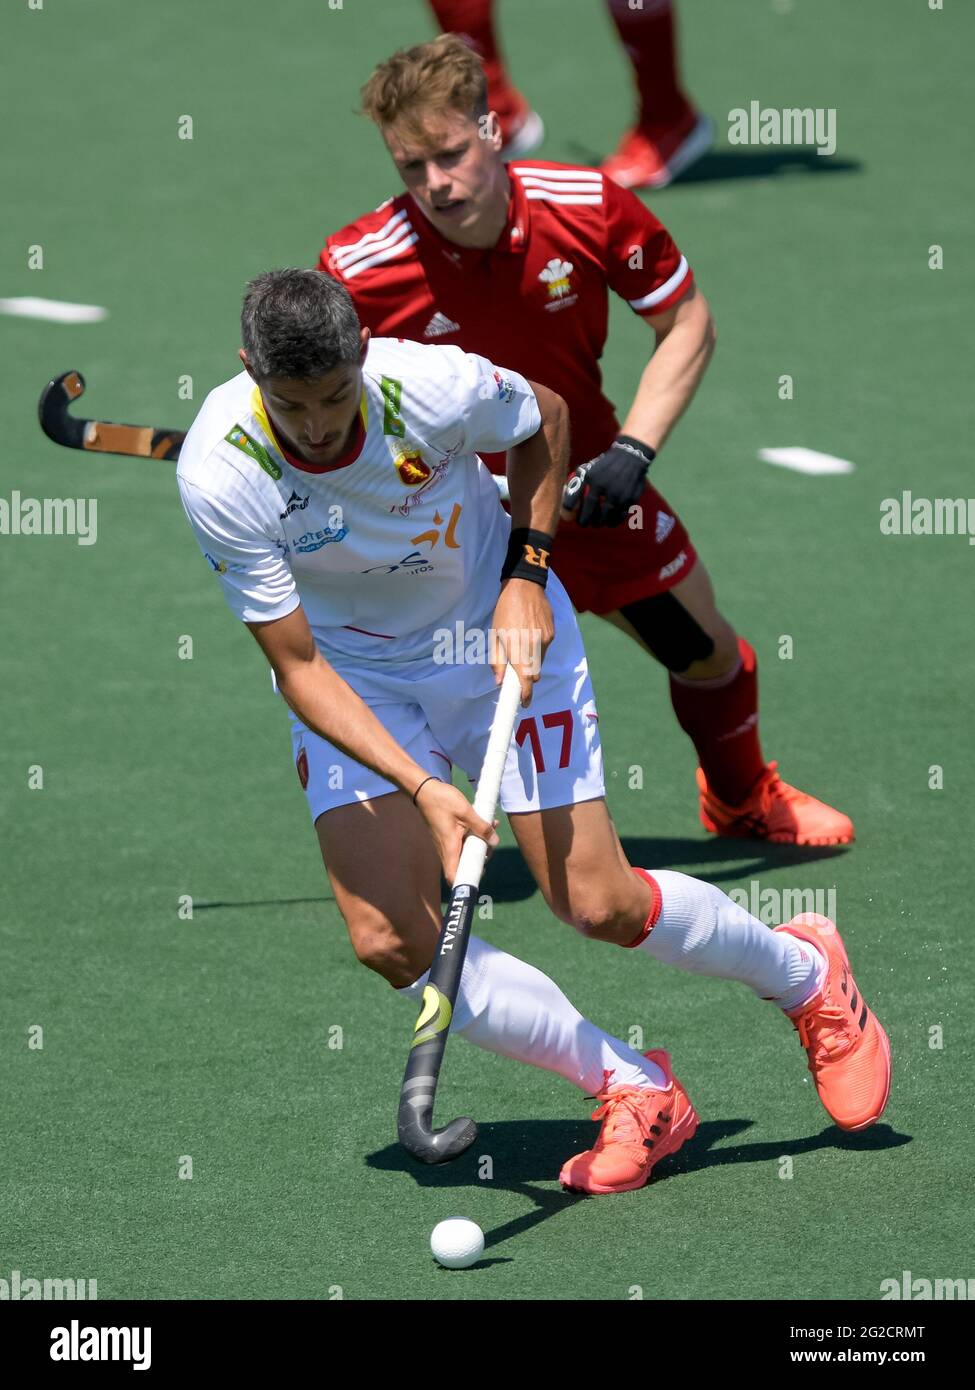 AMSTELVEEN, NETHERLANDS - JUNE 10: Xavi Lleonart of Spain during the Euro  Hockey Championships match between Spain and Wales at Wagener Stadion on  June 10, 2021 in Amstelveen, Netherlands (Photo by Gerrit